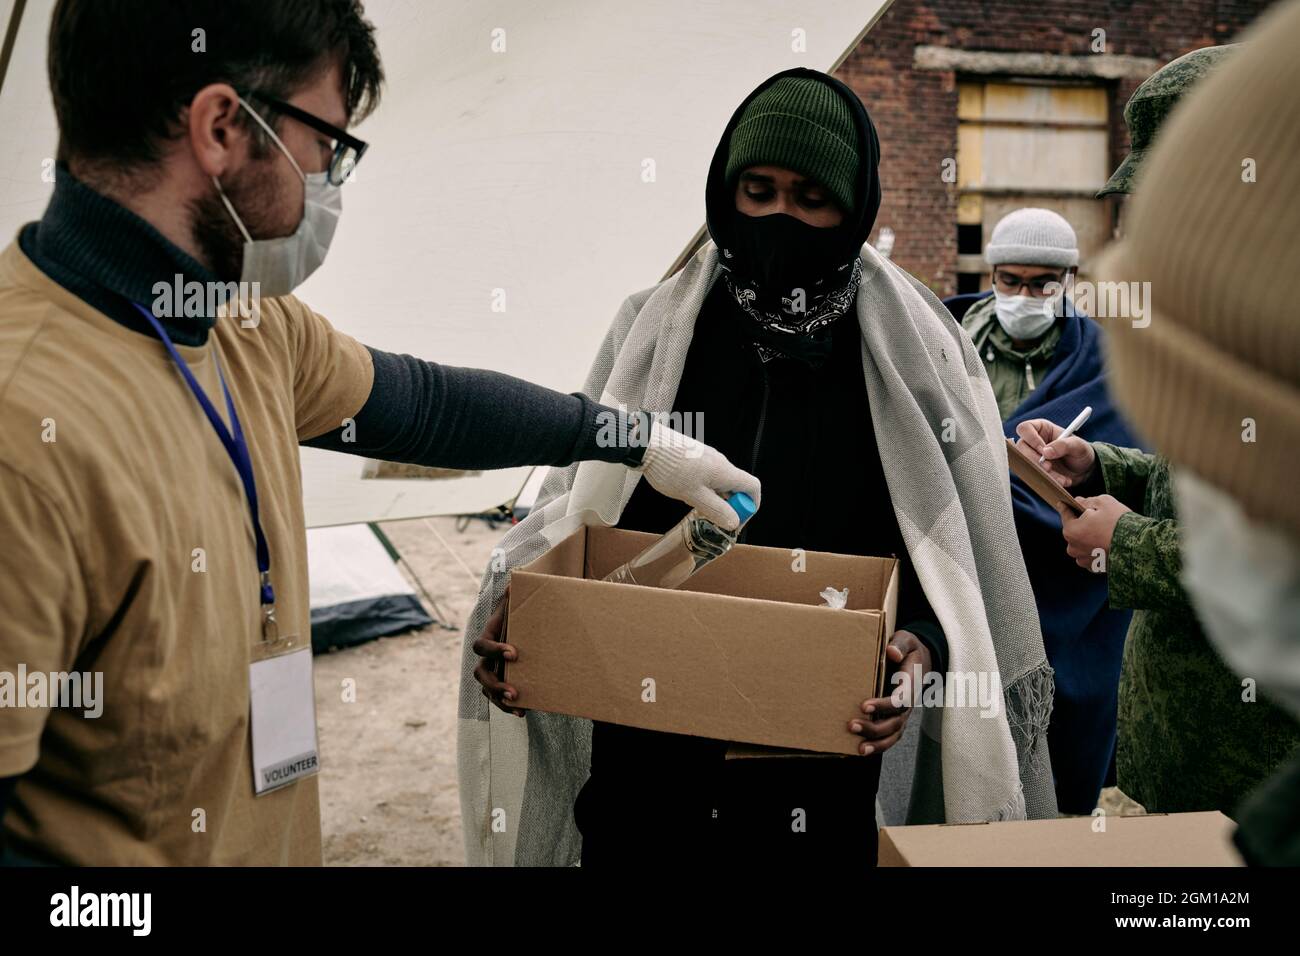 Social Worker in mask and glasses putting bottle of water into box held by middle-eastern refugee with plaid on shoulders Stock Photo